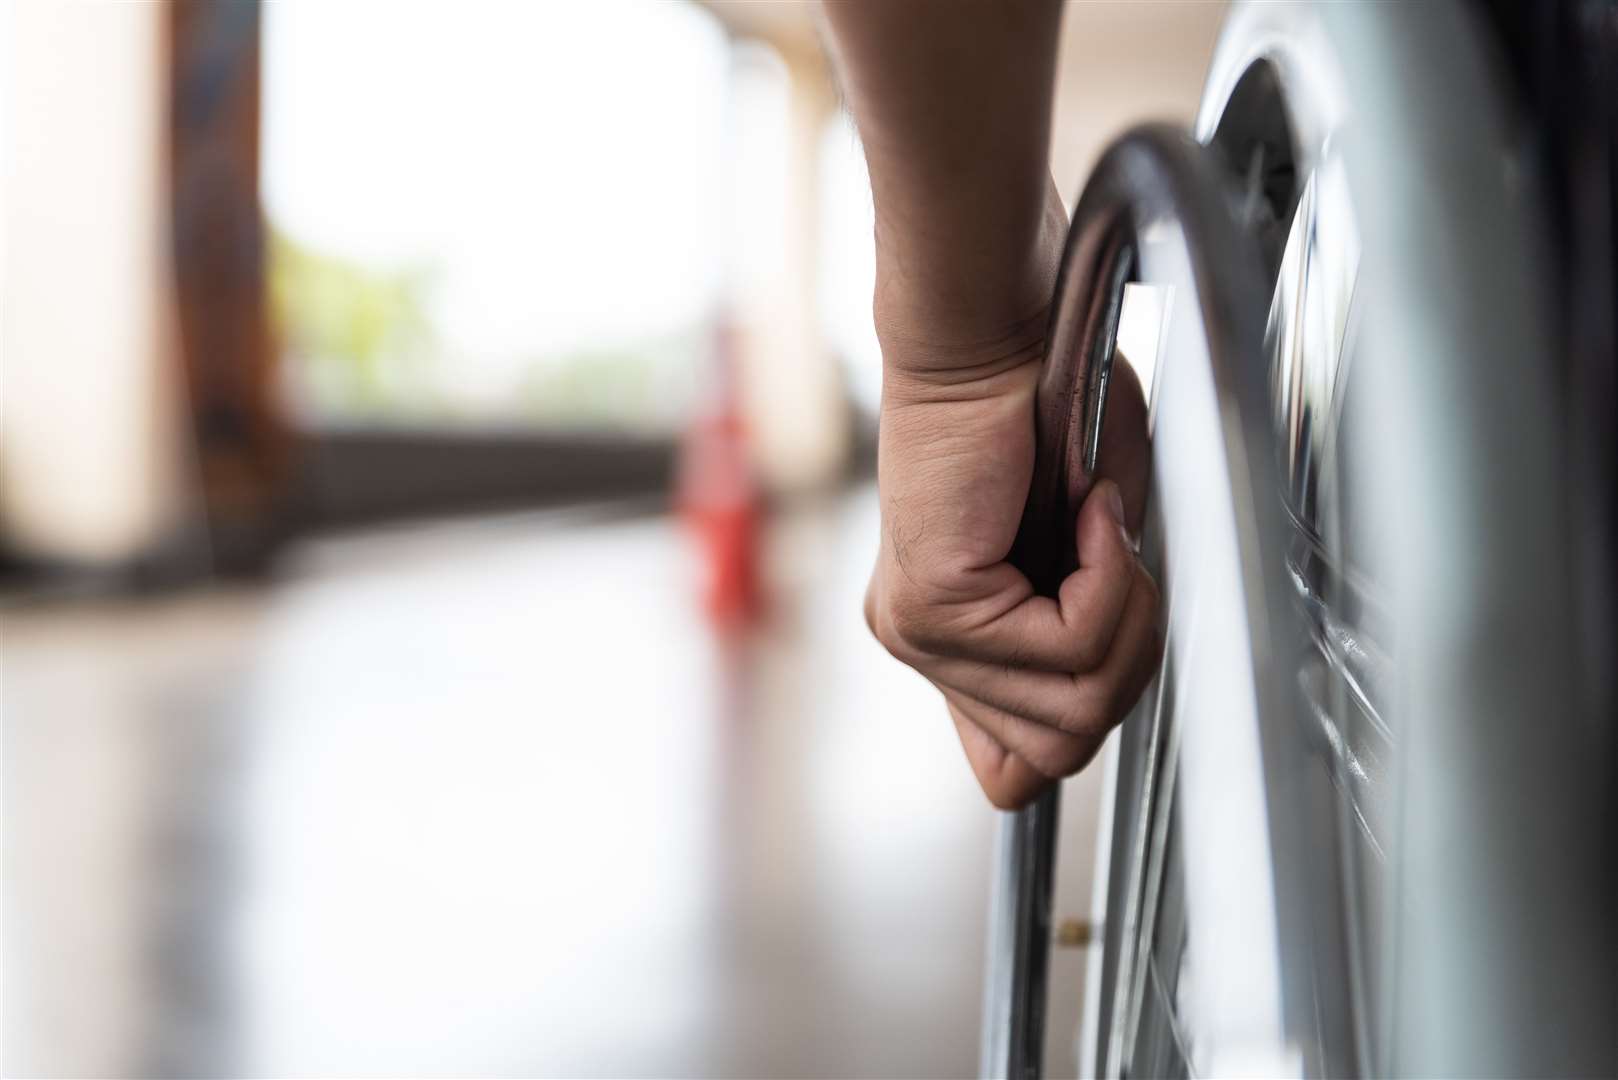 The disabled woman was refused a spot on Thanet council's housing register despite being rendered housebound because her home is not accessible using a wheelchair